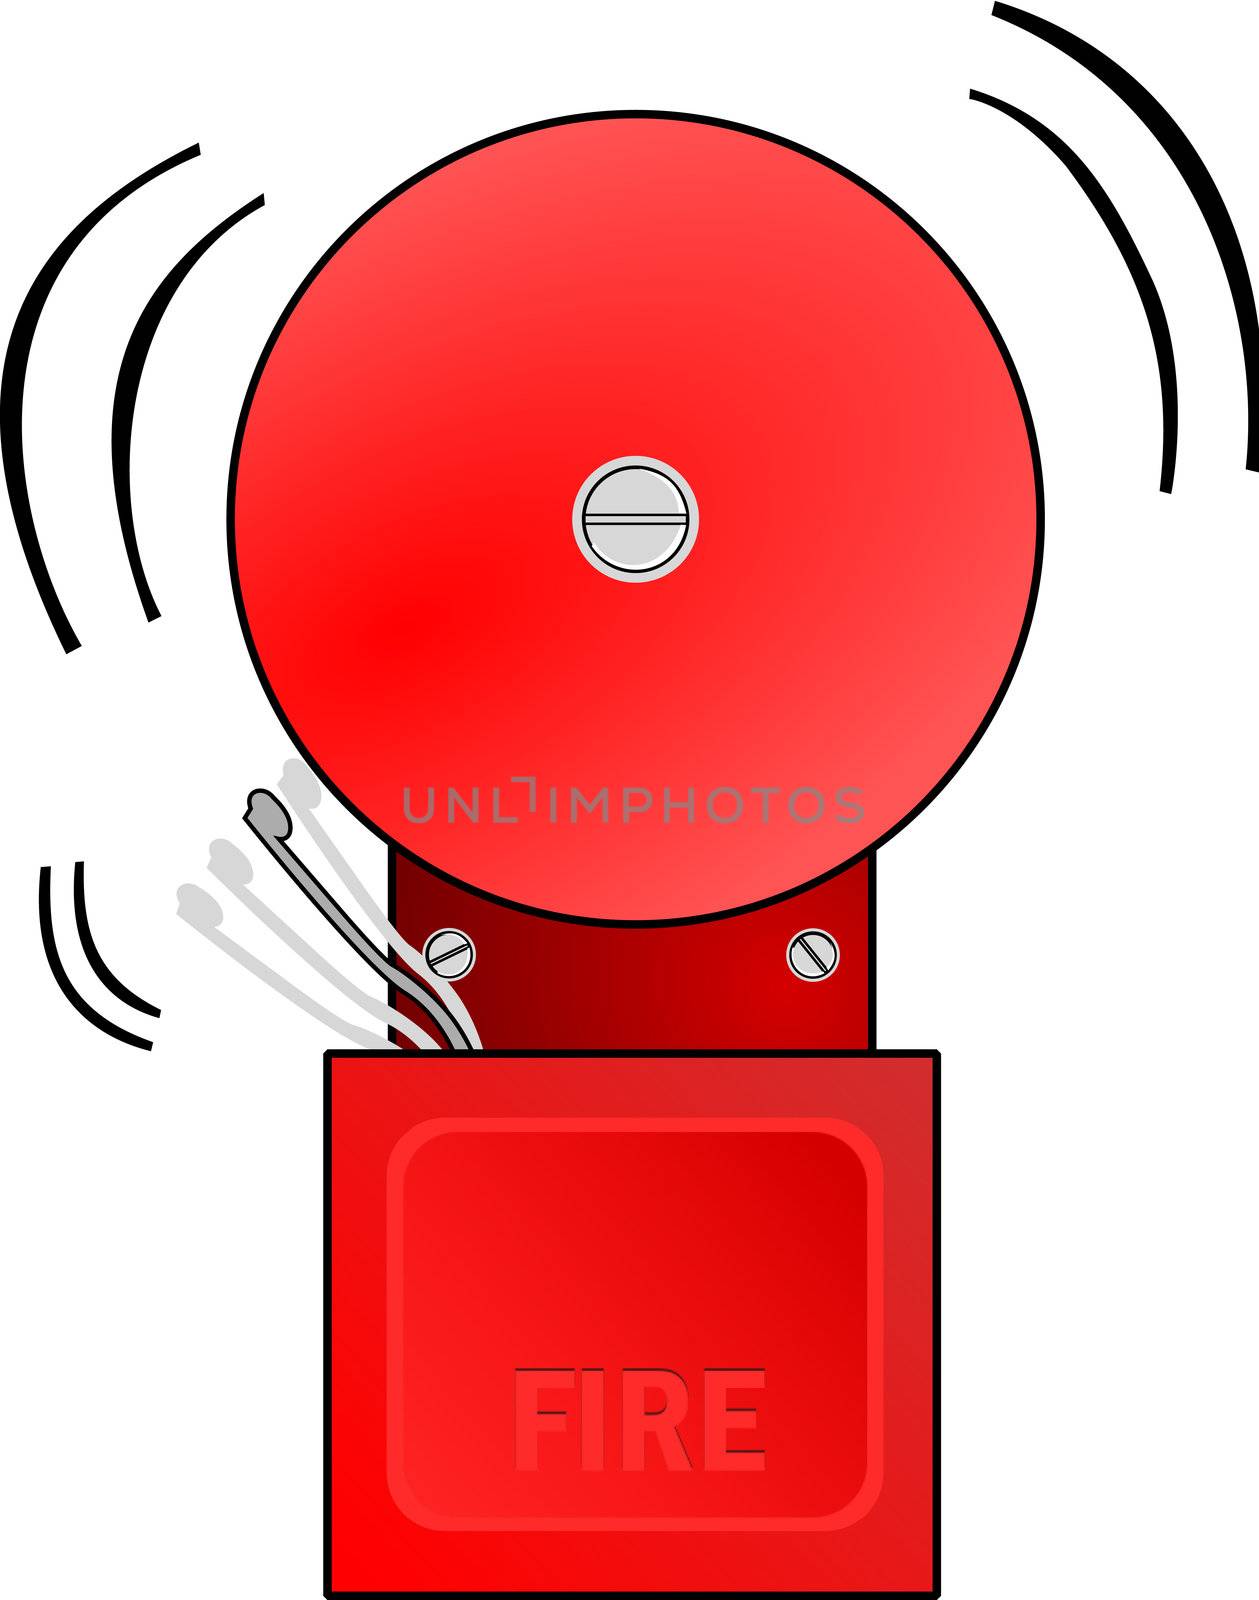 Red fire alarm goes off and rings the bell.